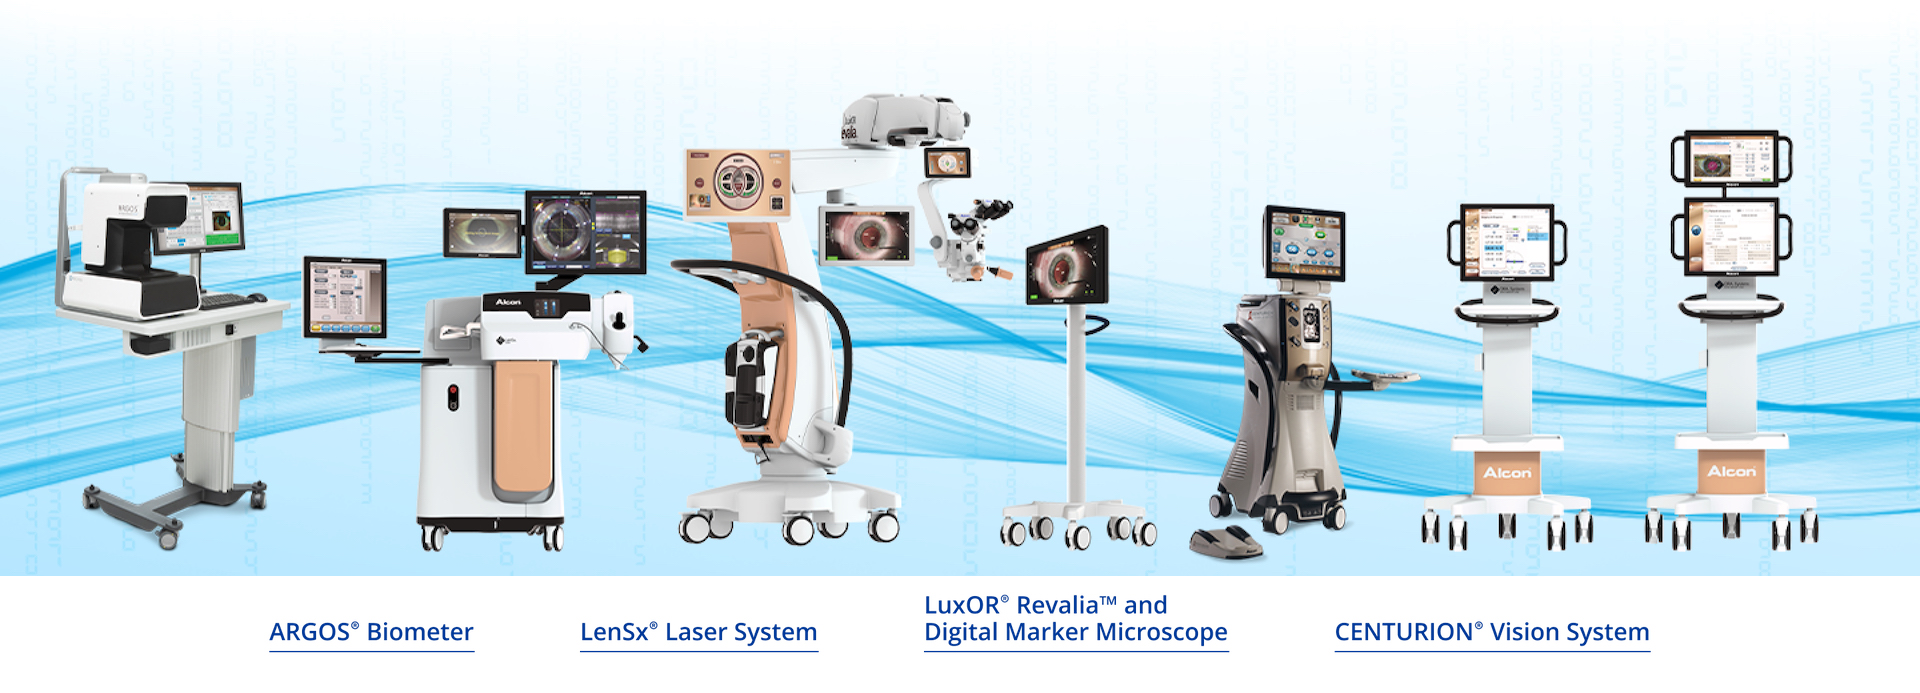 An image showing different surgical devices made by Alcon. The ARGOS Biometer, LenSx Laser System, LuxOR Revalia Ophthalmic Microscope, Verion Digital Marker, Centurion Vision System, ORA SYSTEM Intraoperative Abberometer.